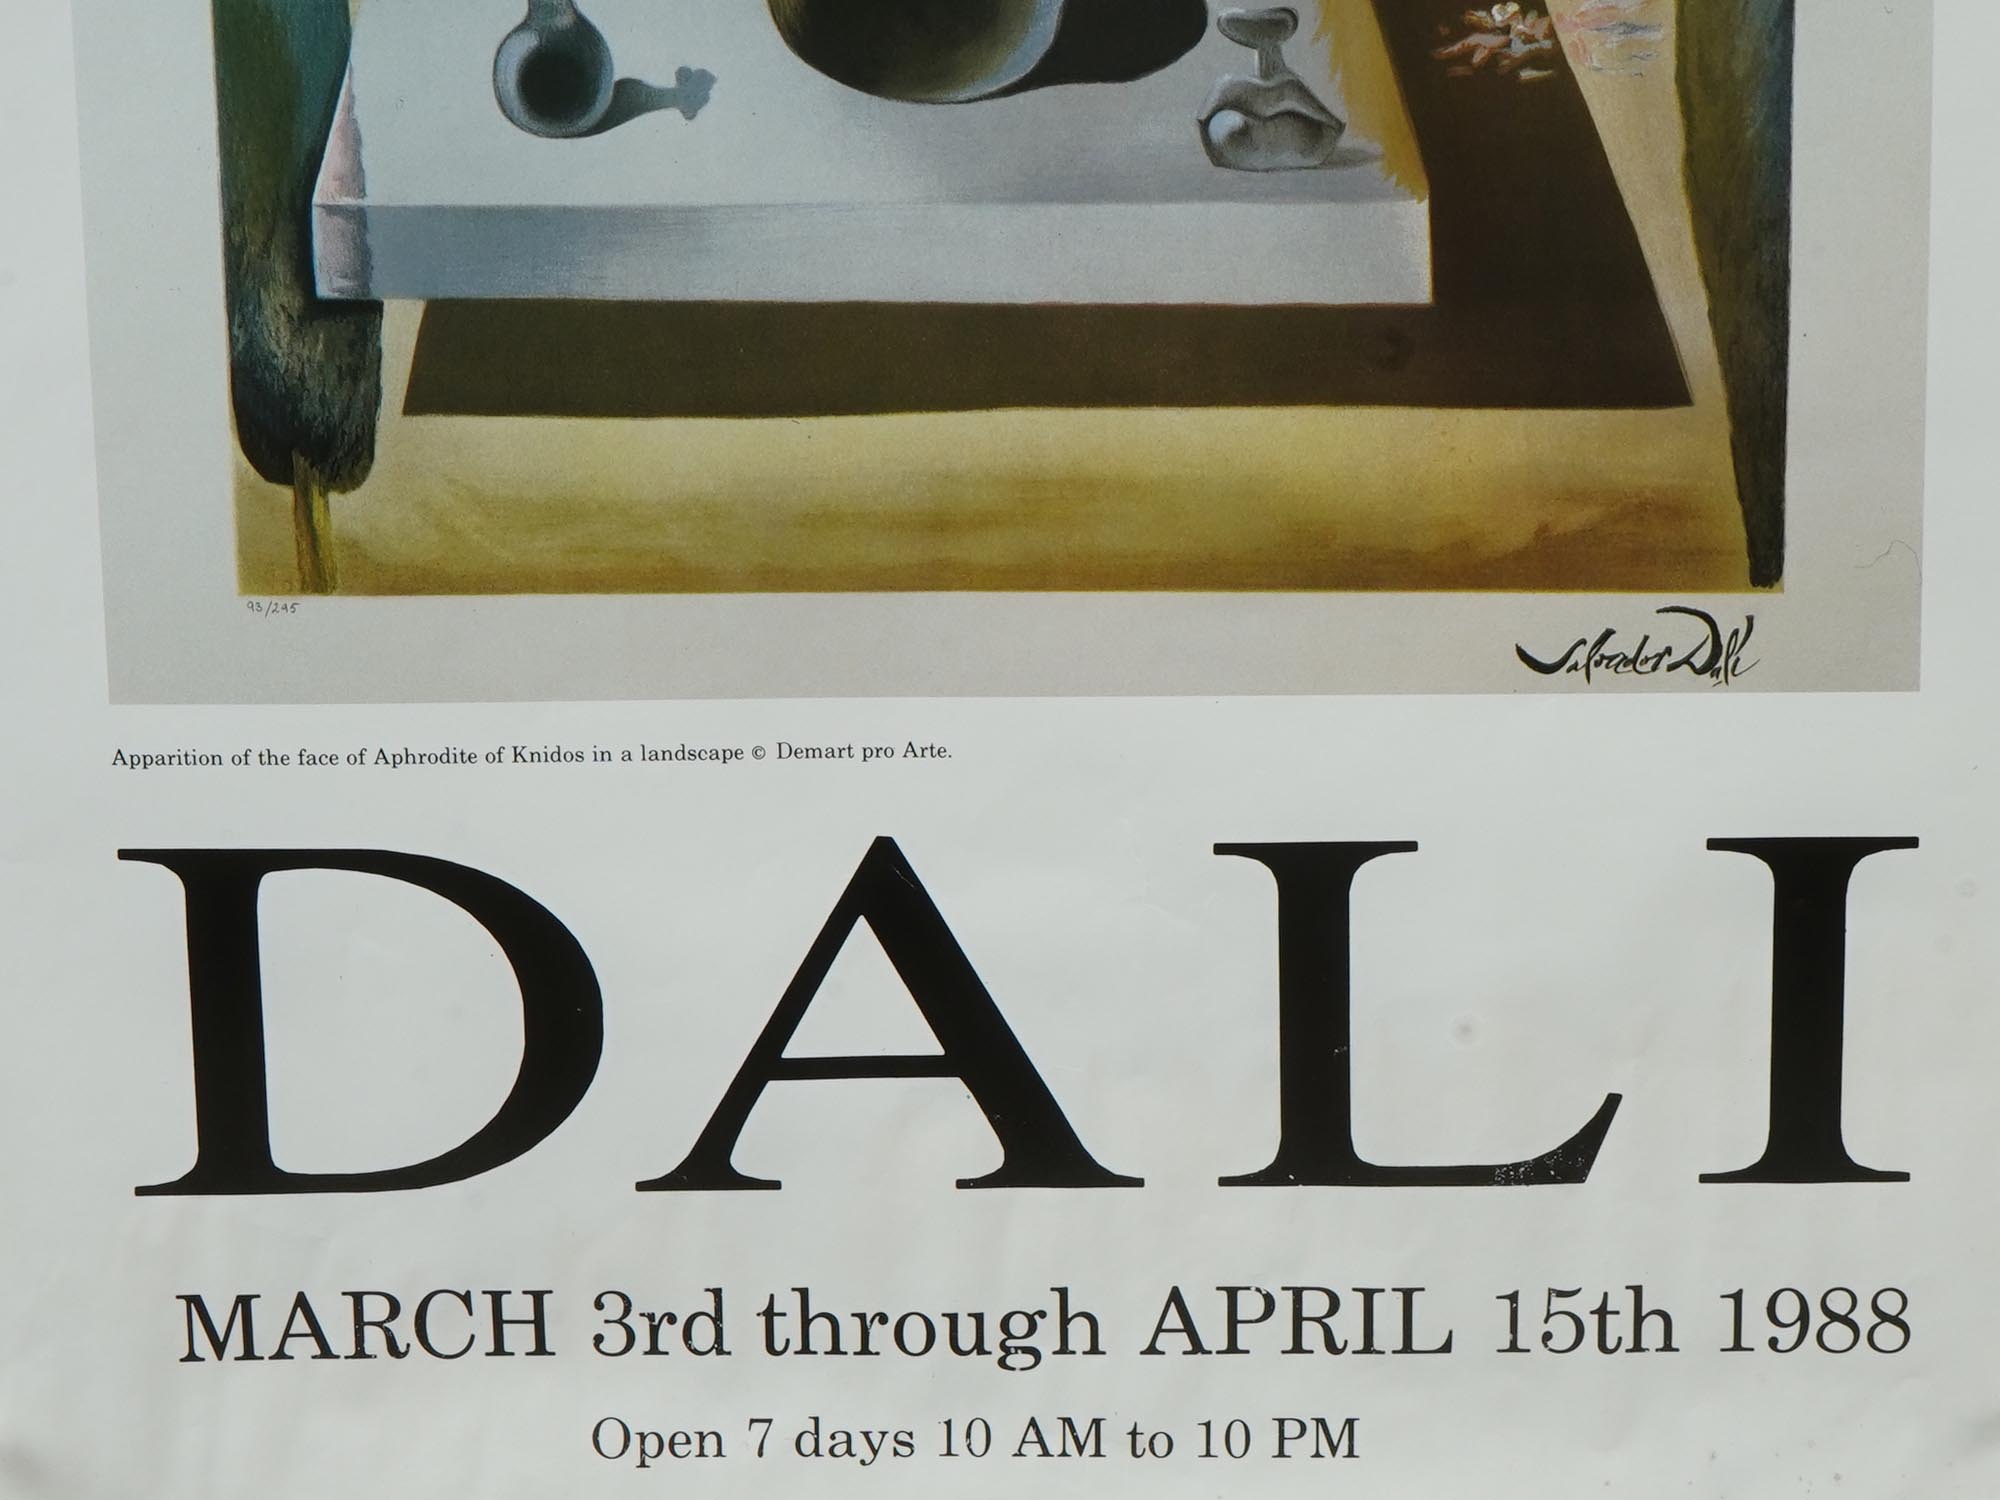 LOT OF ANDY WARHOL SALVADOR DALI EXHIBITION POSTERS PIC-3